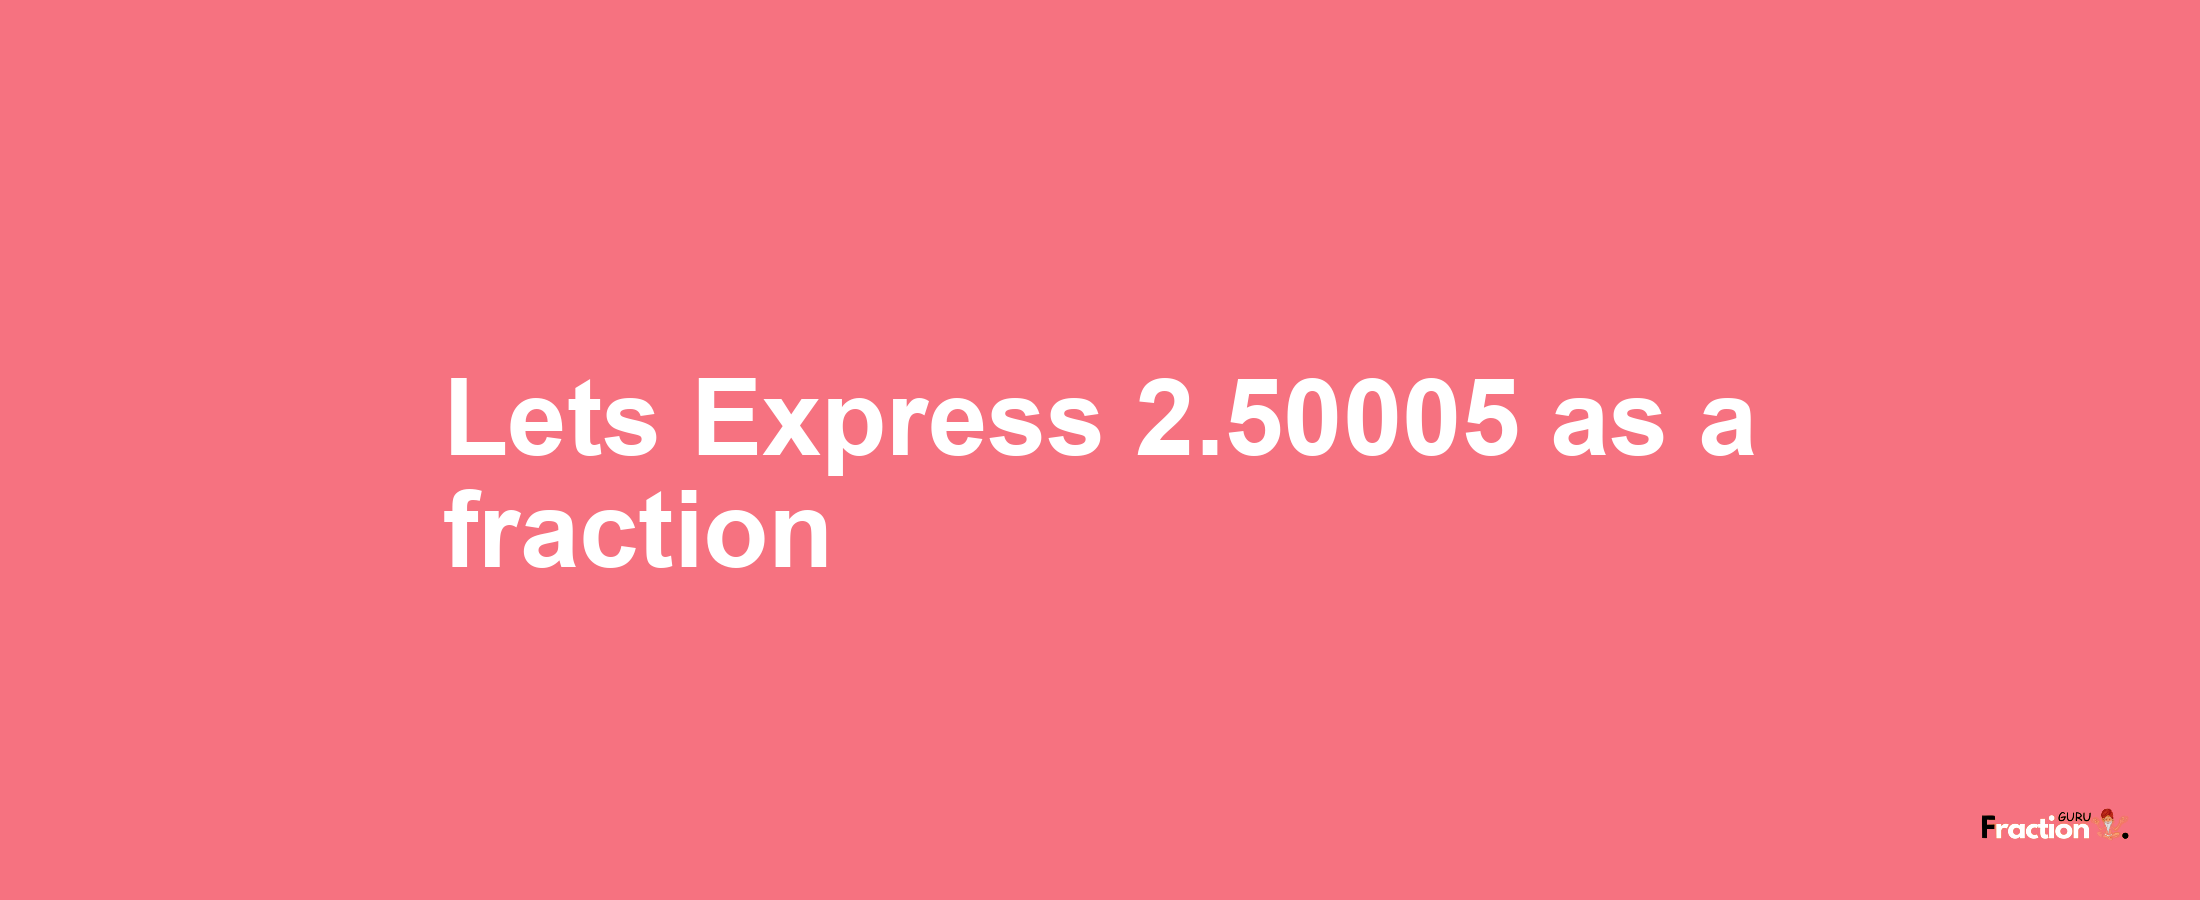 Lets Express 2.50005 as afraction